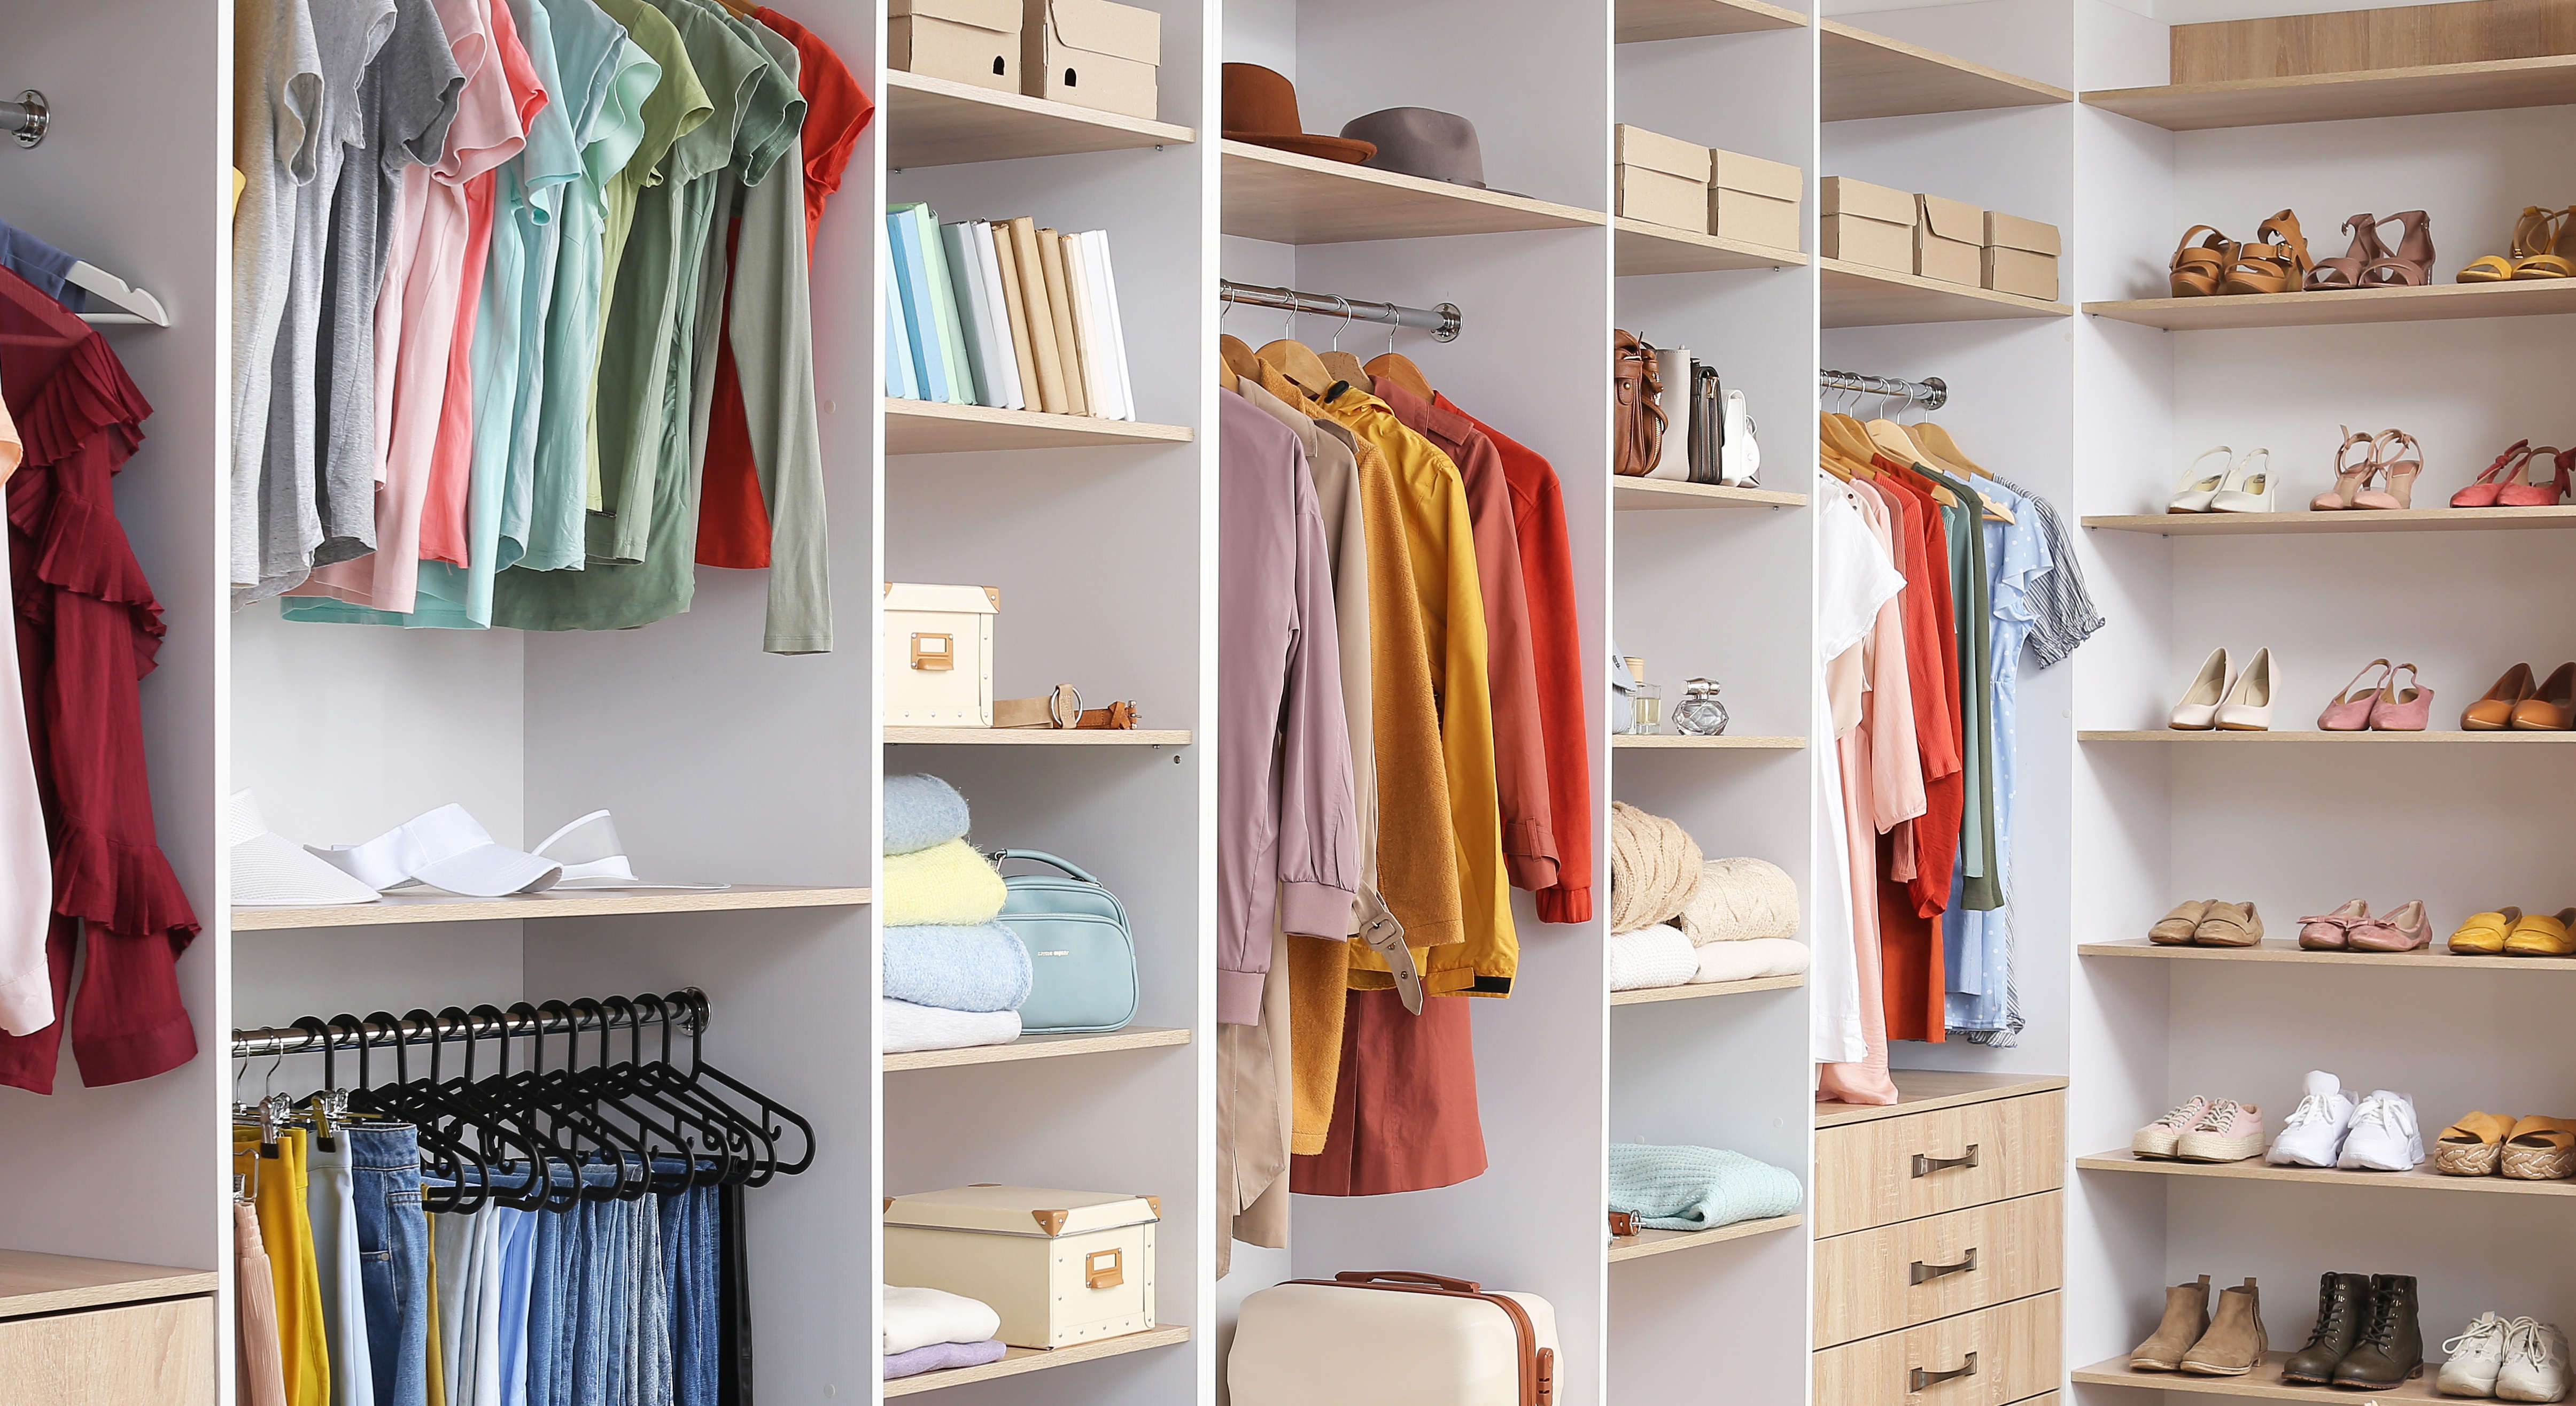 How to declutter a closet like a pro — try these 7 tips | Tom's Guide